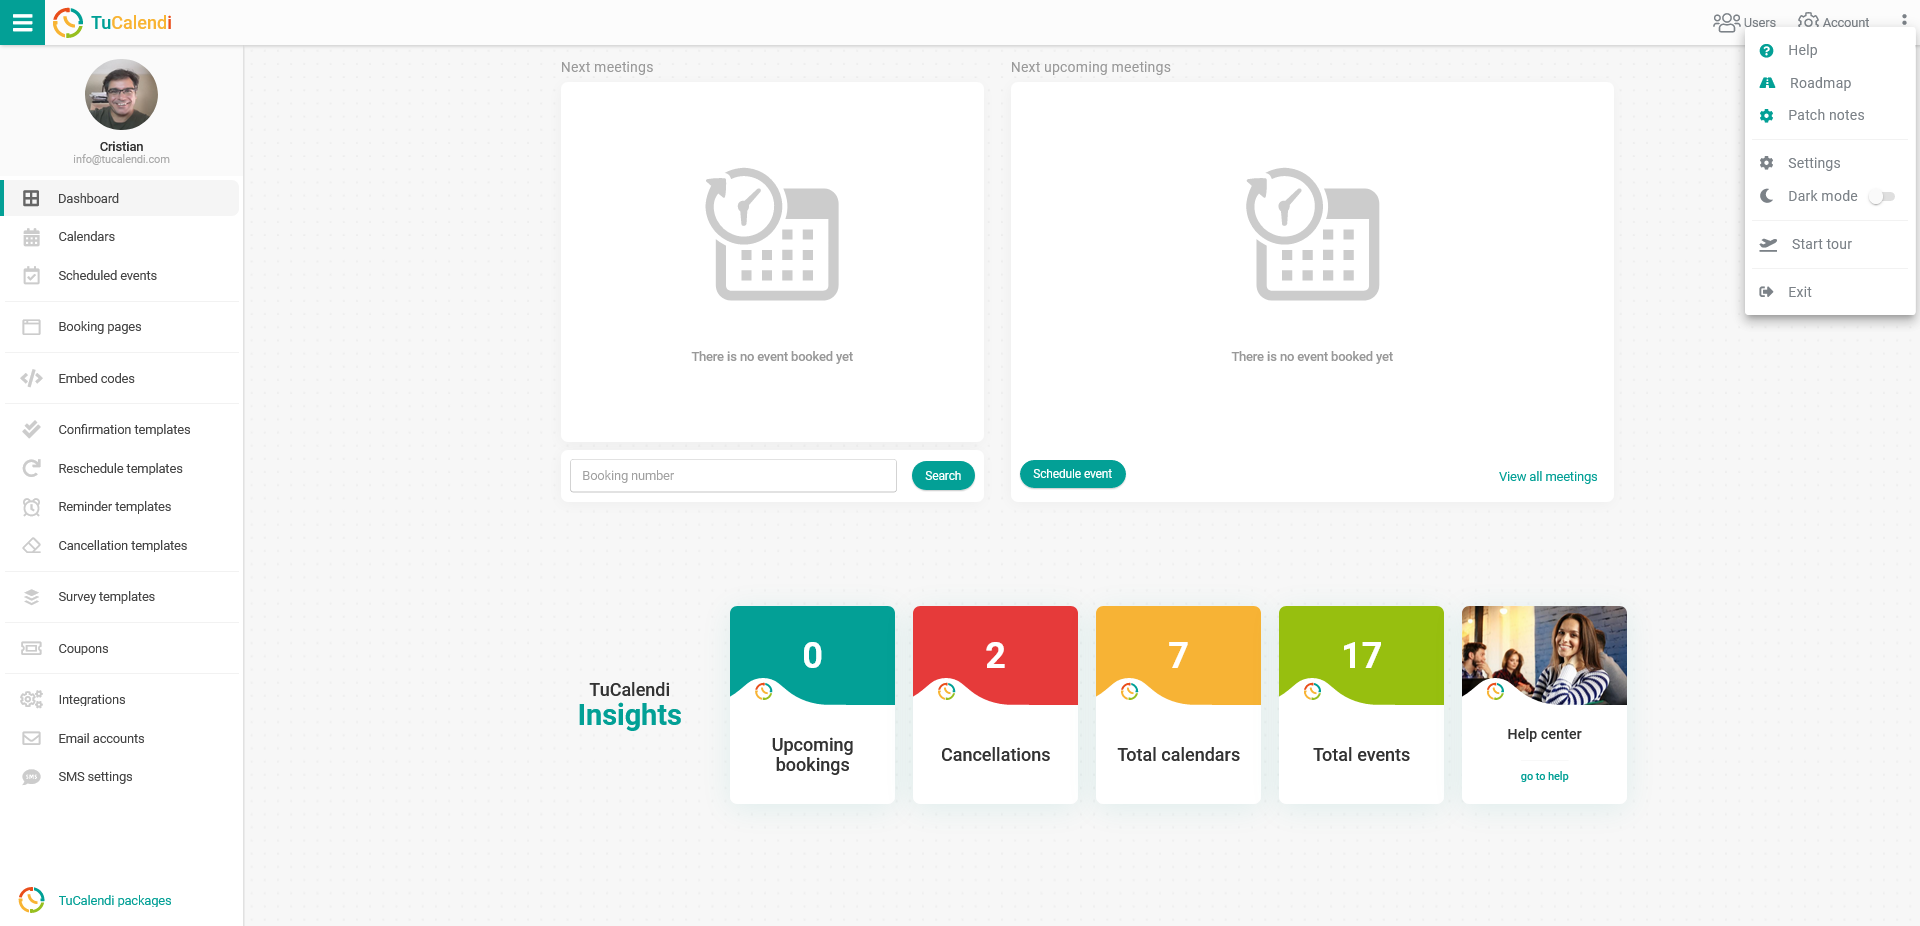 Access to start TuCalendi's onboarding tour